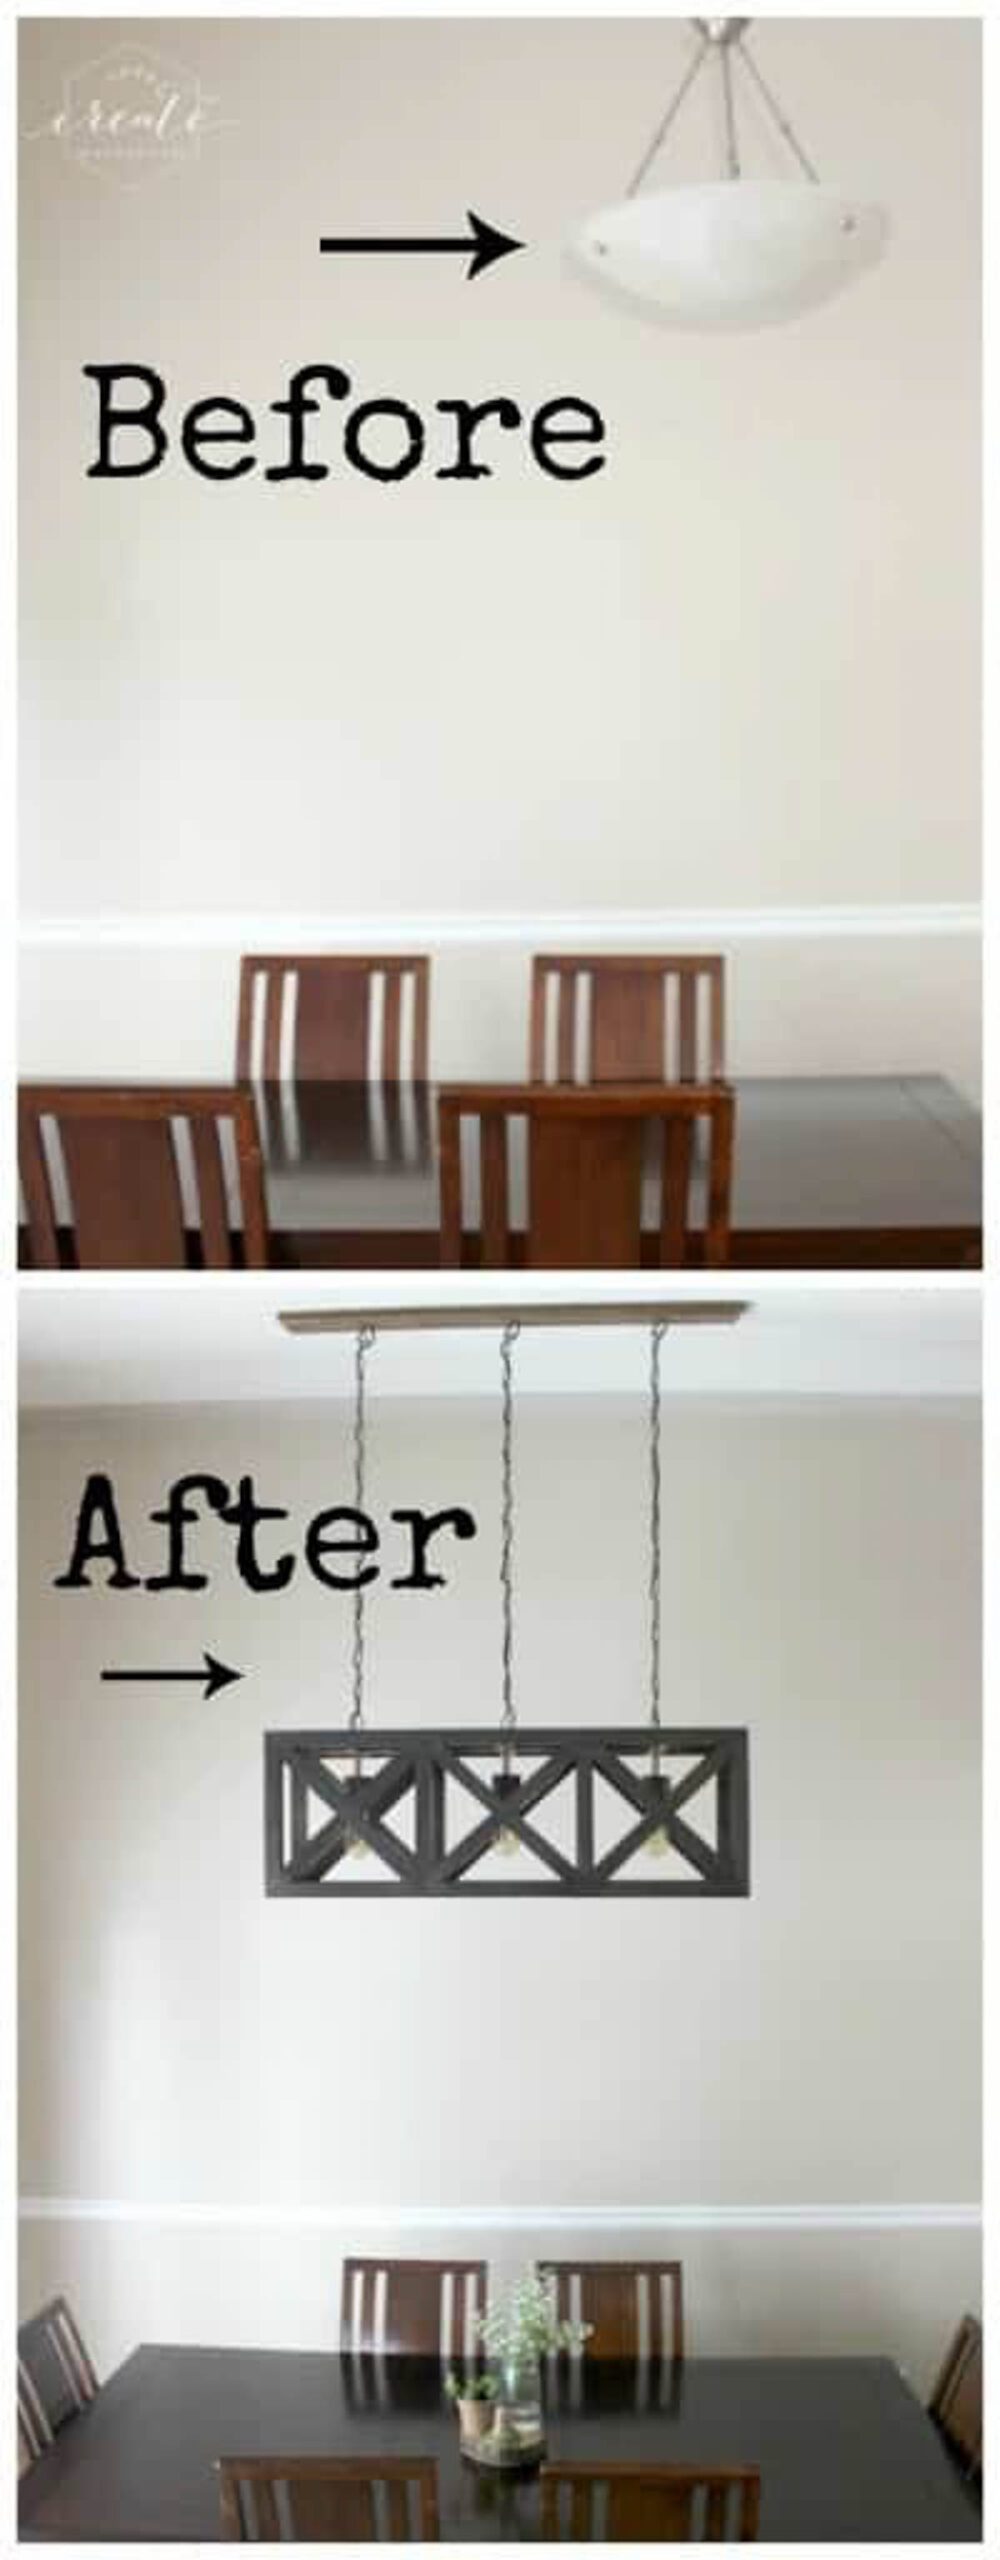 Before and after of the industrial pendant light